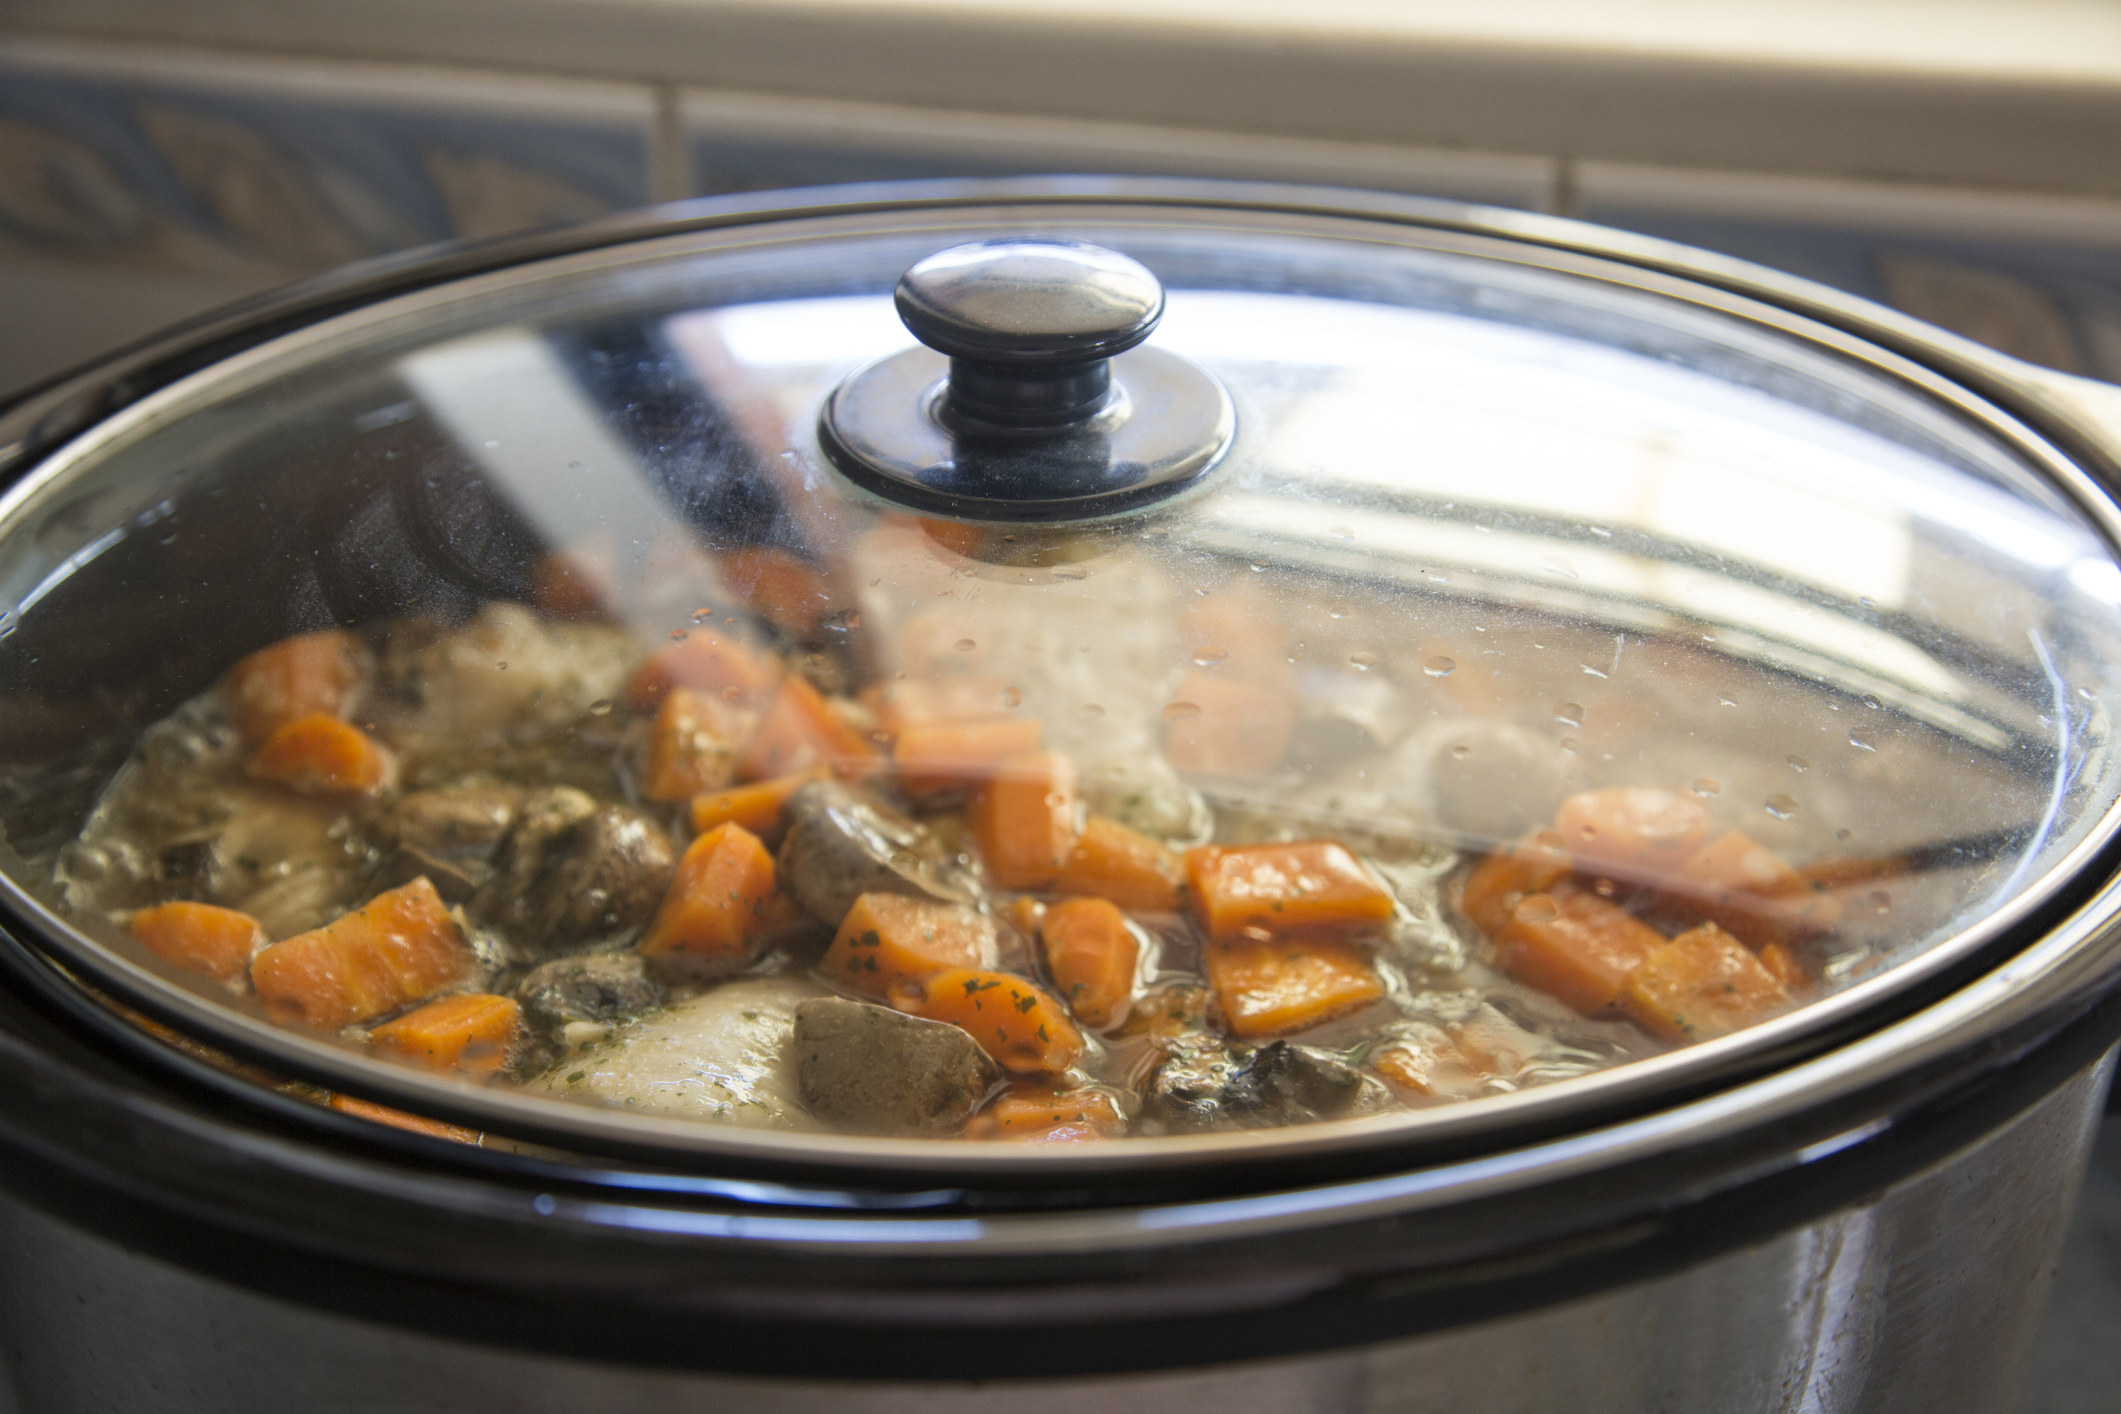 A beef dish with carrots in a slow cooker.